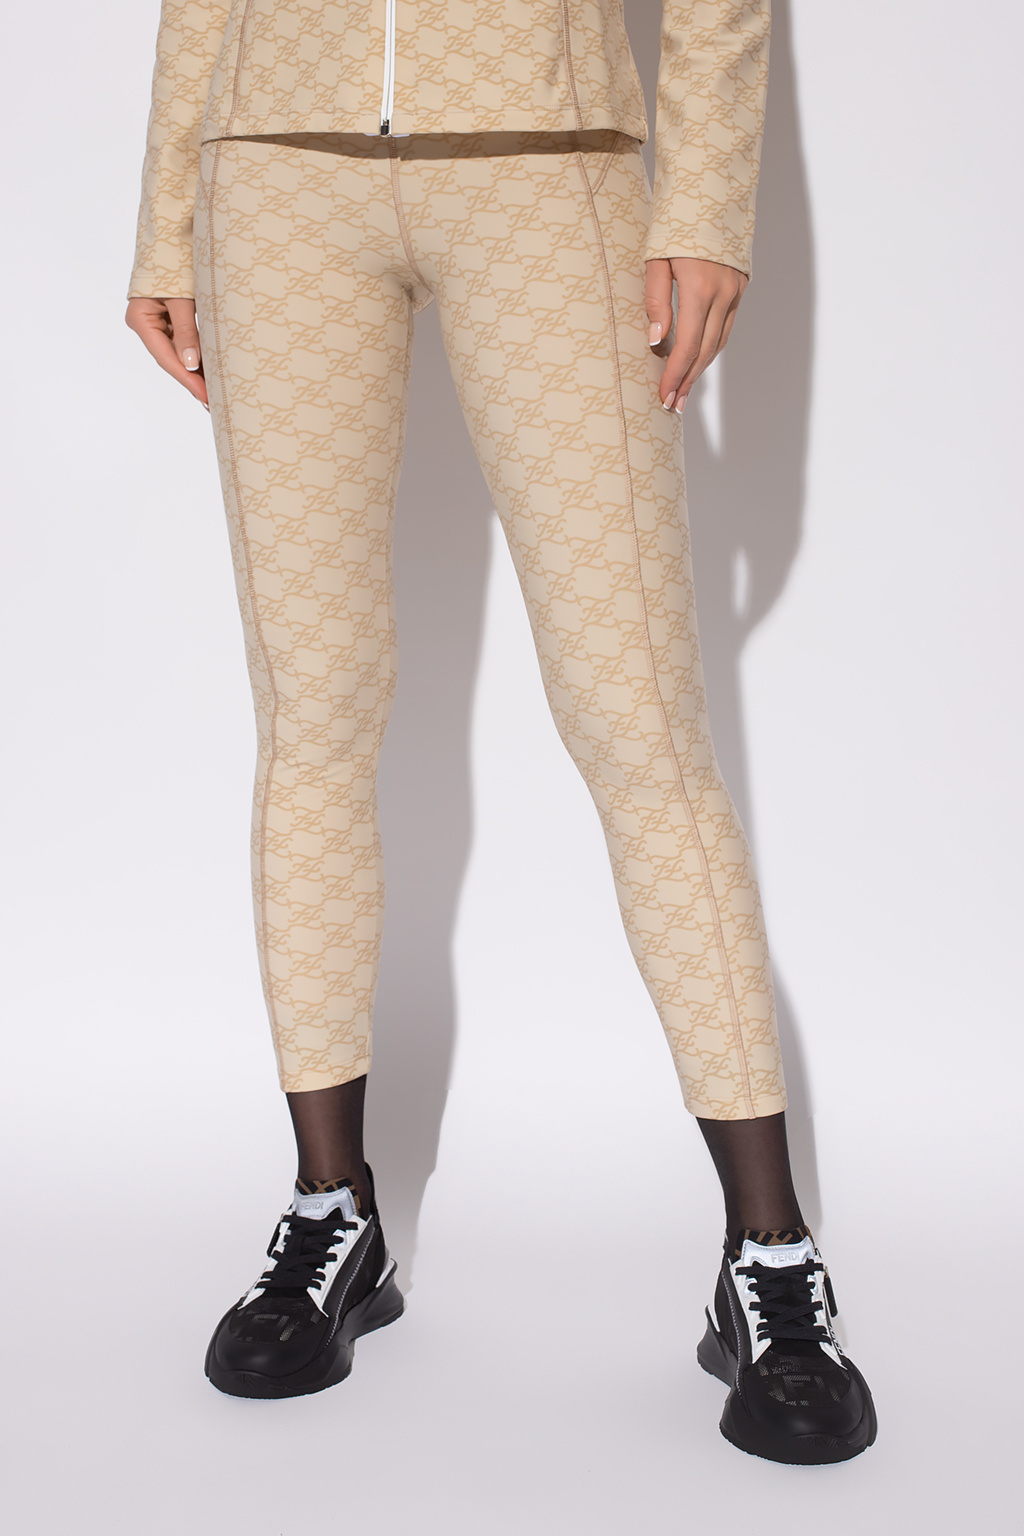 Fendi Patterned tights, Women's Clothing